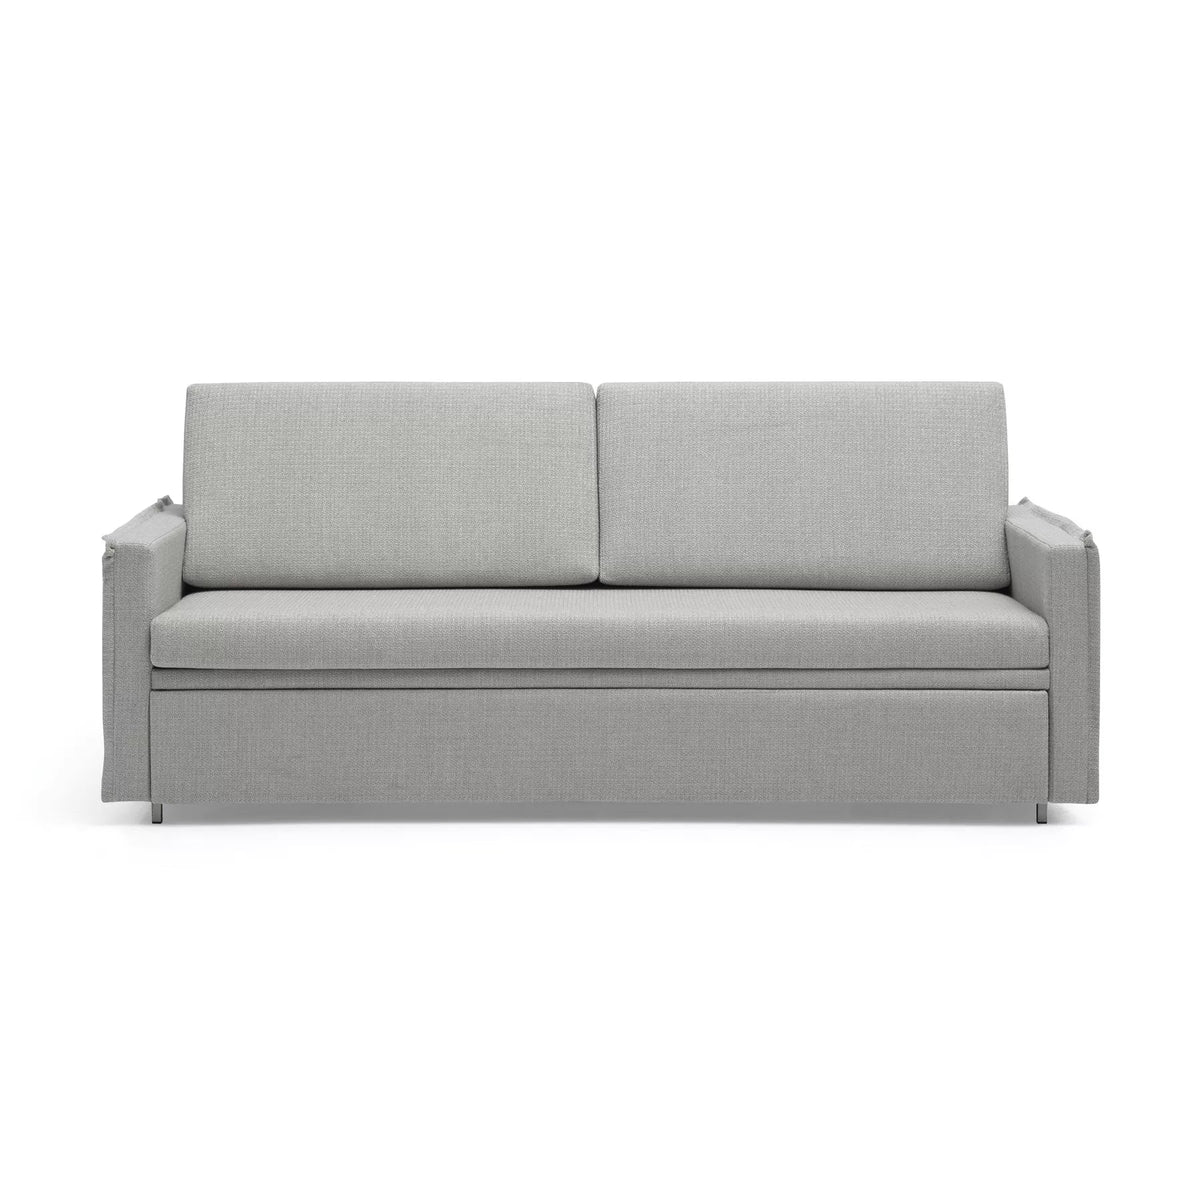 Beth 921 Sofa Bed-TM Leader-Contract Furniture Store